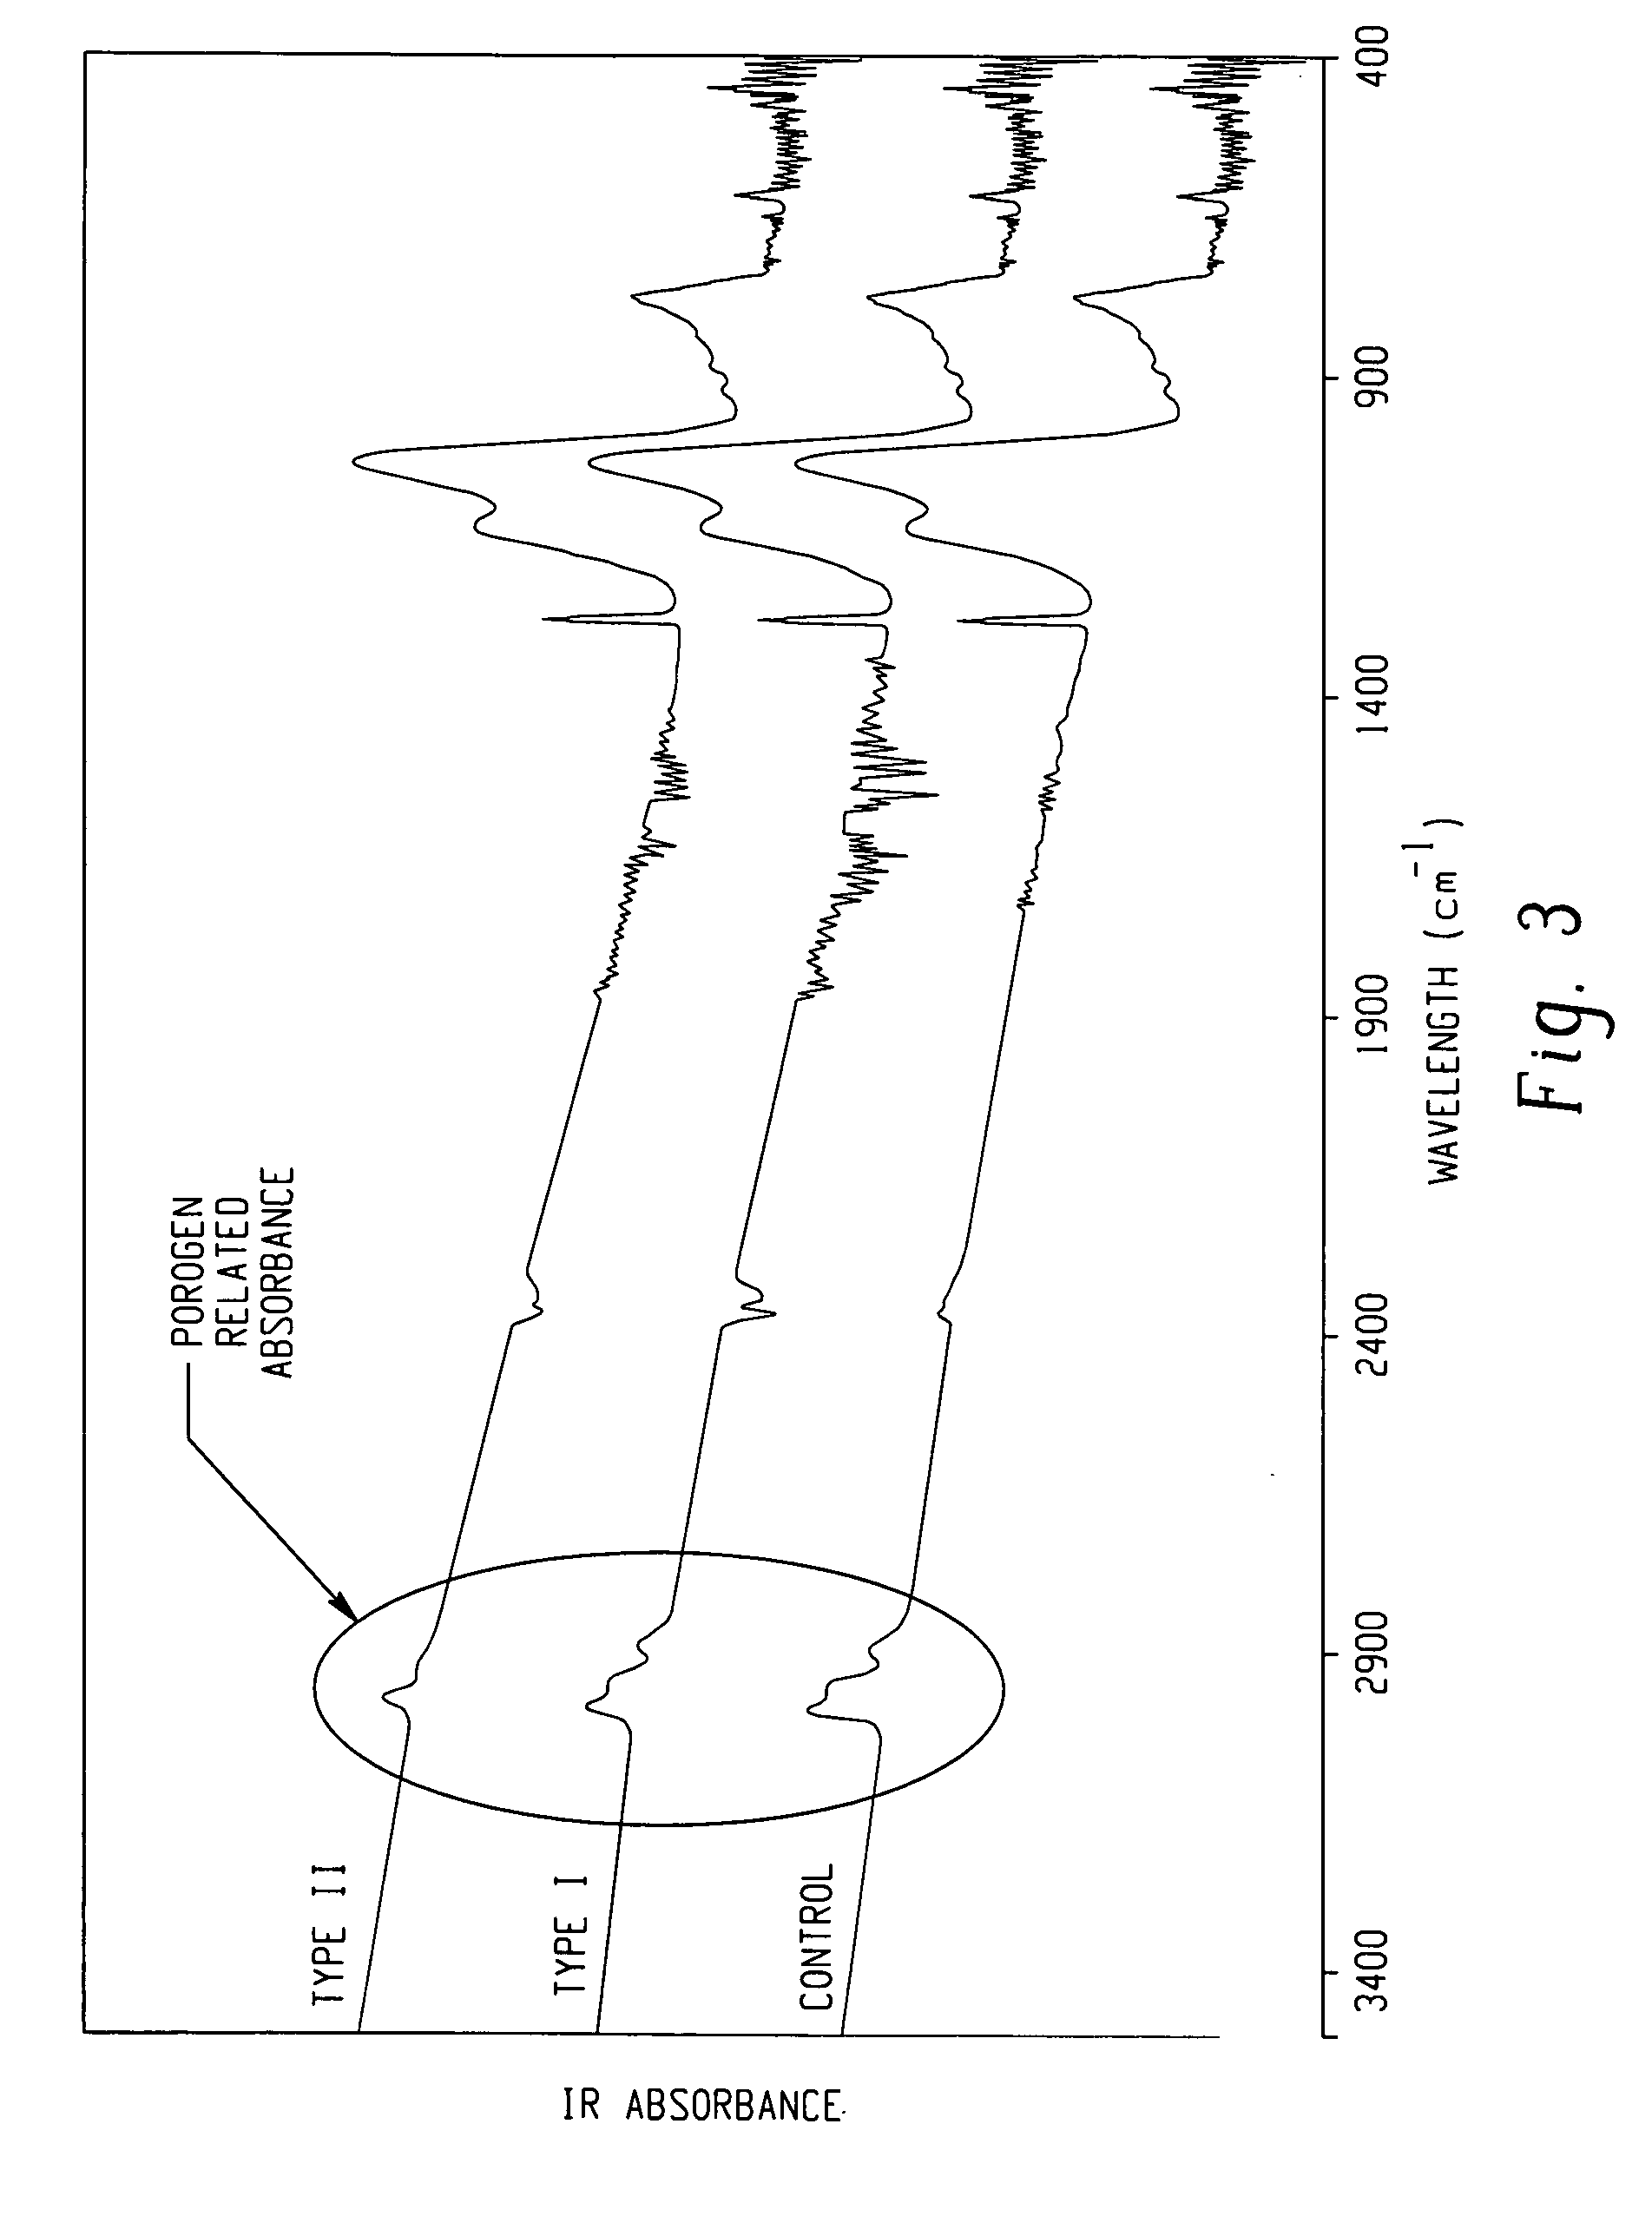 Ultraviolet assisted porogen removal and/or curing processes for forming porous low k dielectrics